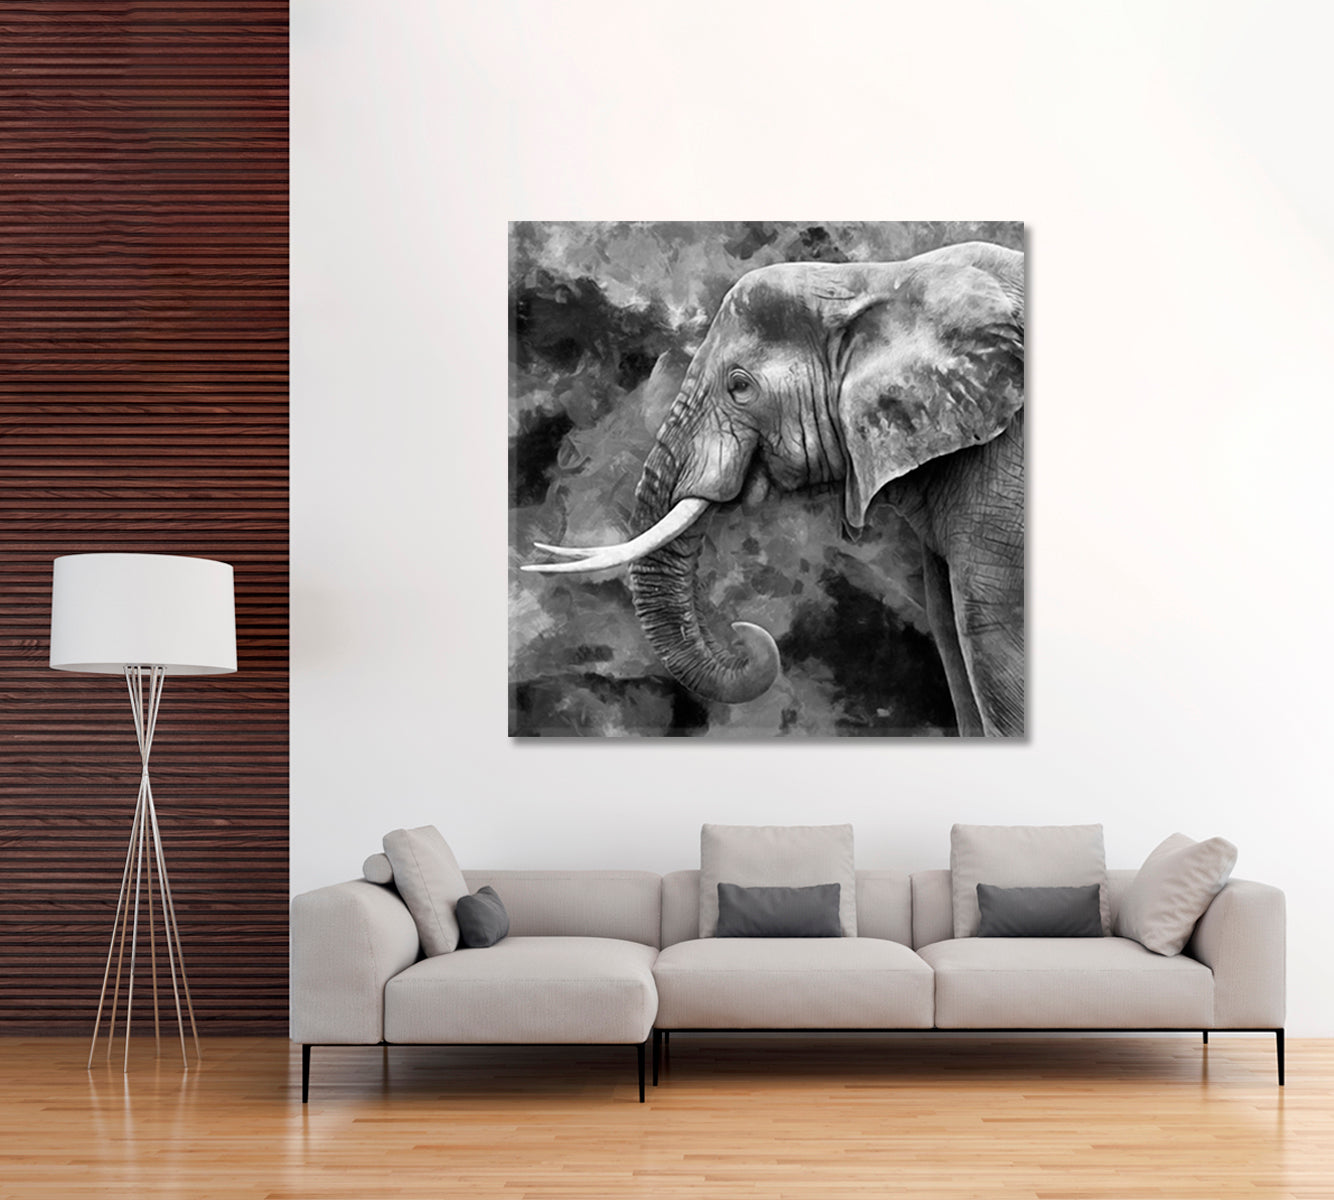 Abstract Elephant Portrait in Black And White Canvas Print-Canvas Print-CetArt-1 panel-12x12 inches-CetArt